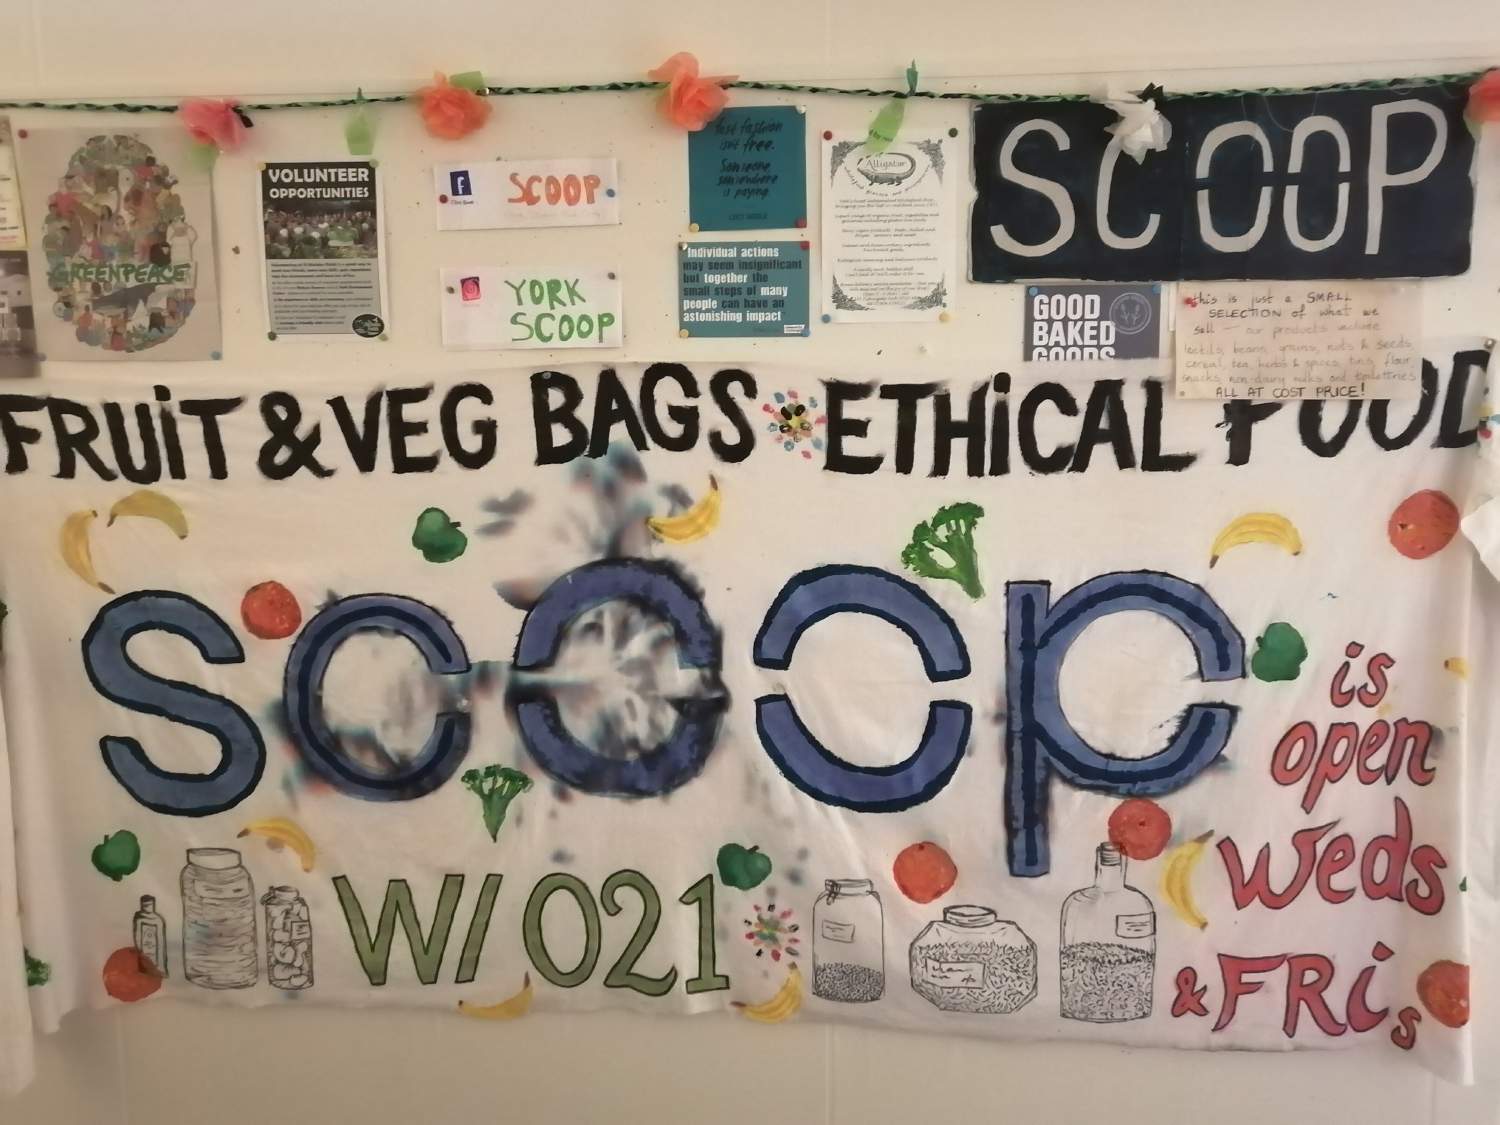 SCOOP offers a way for students to shop sustainably